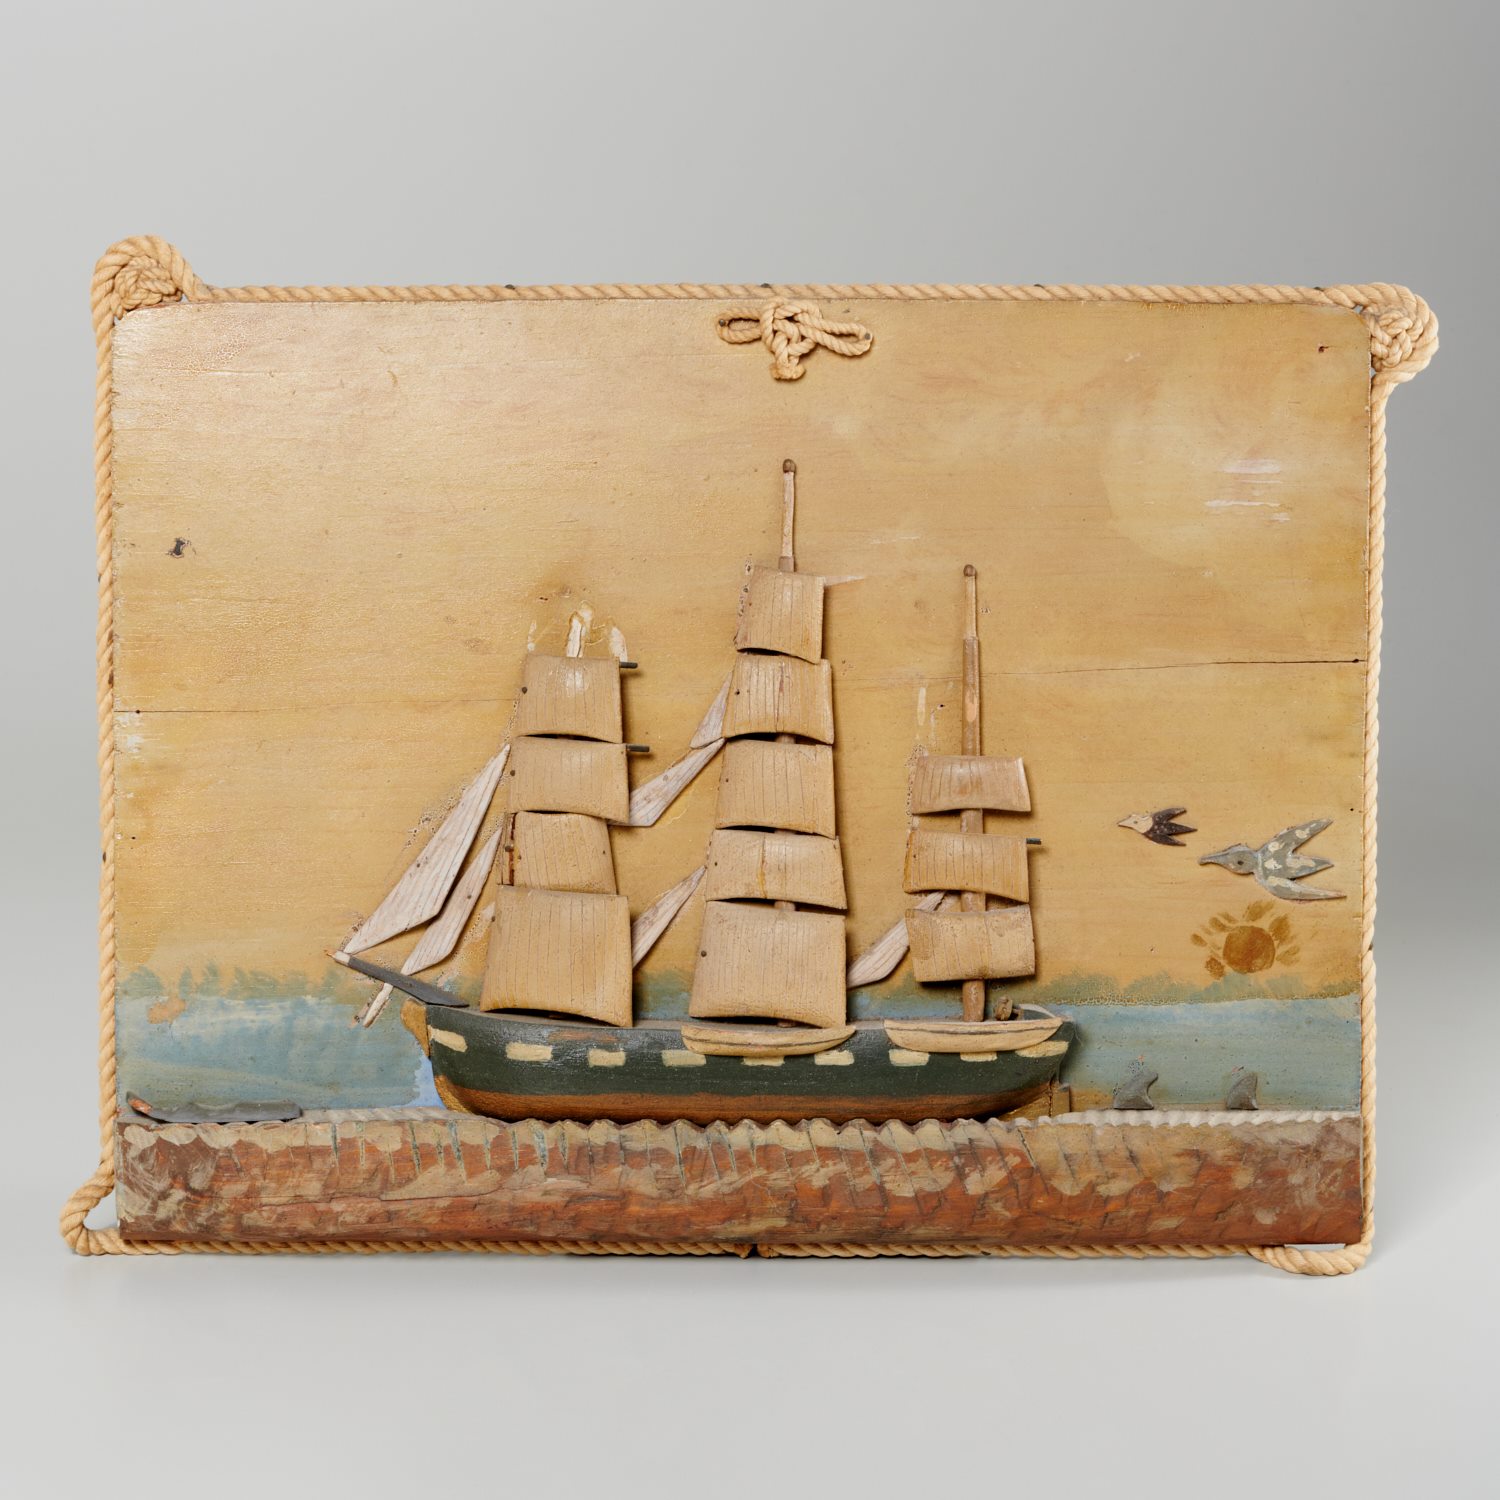 FOLK ART WHALING SHIP RELIEF PAINTING 361dae